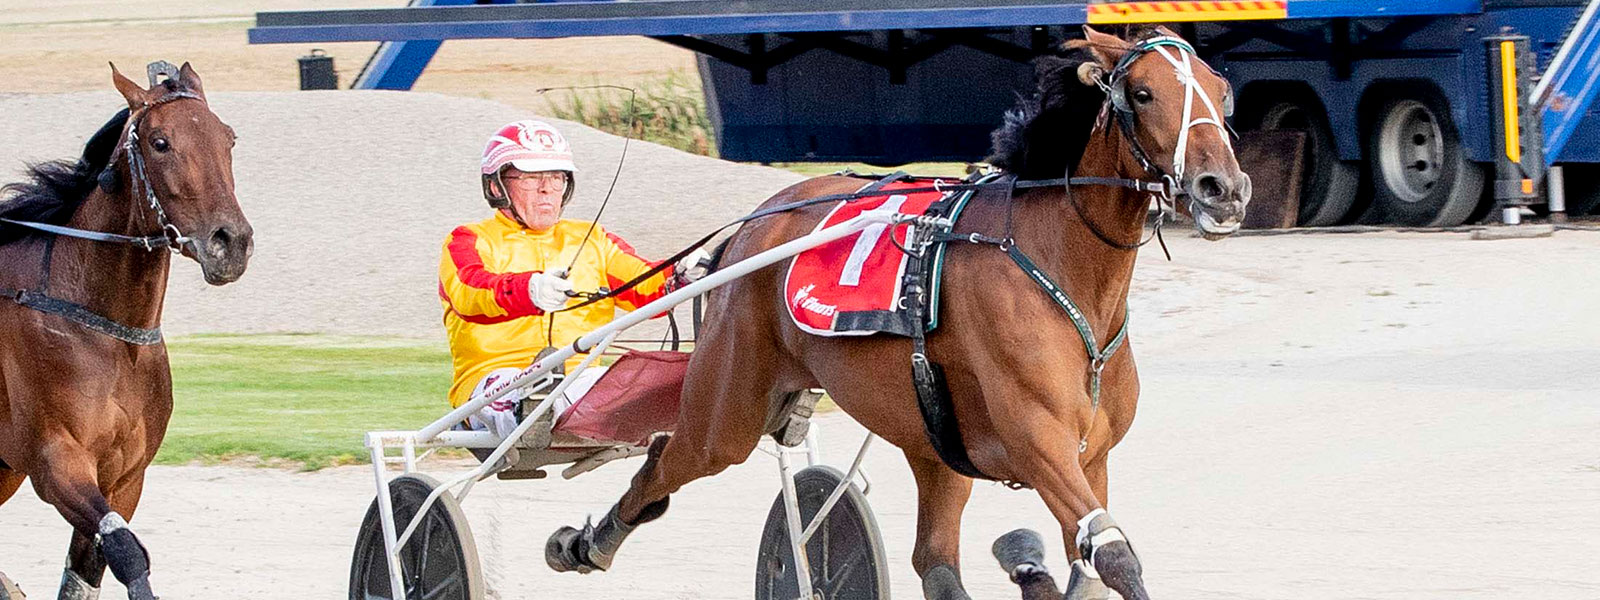 Swapsies for two Lilley-trained trotters